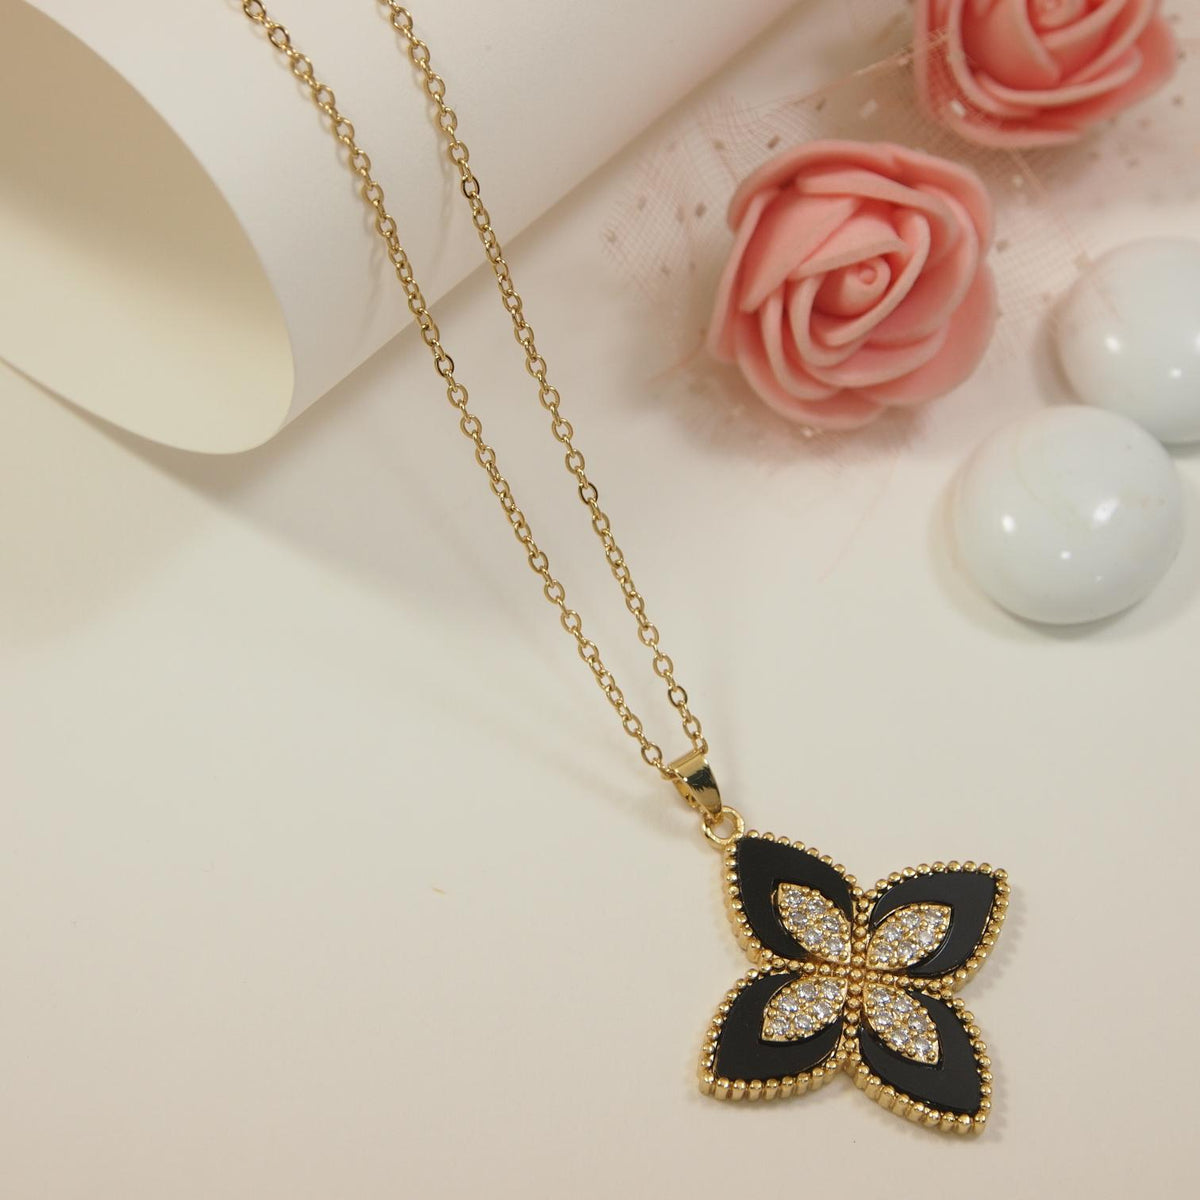 Stainless Steel Clover Pendent Chain Necklace - STNK 4987